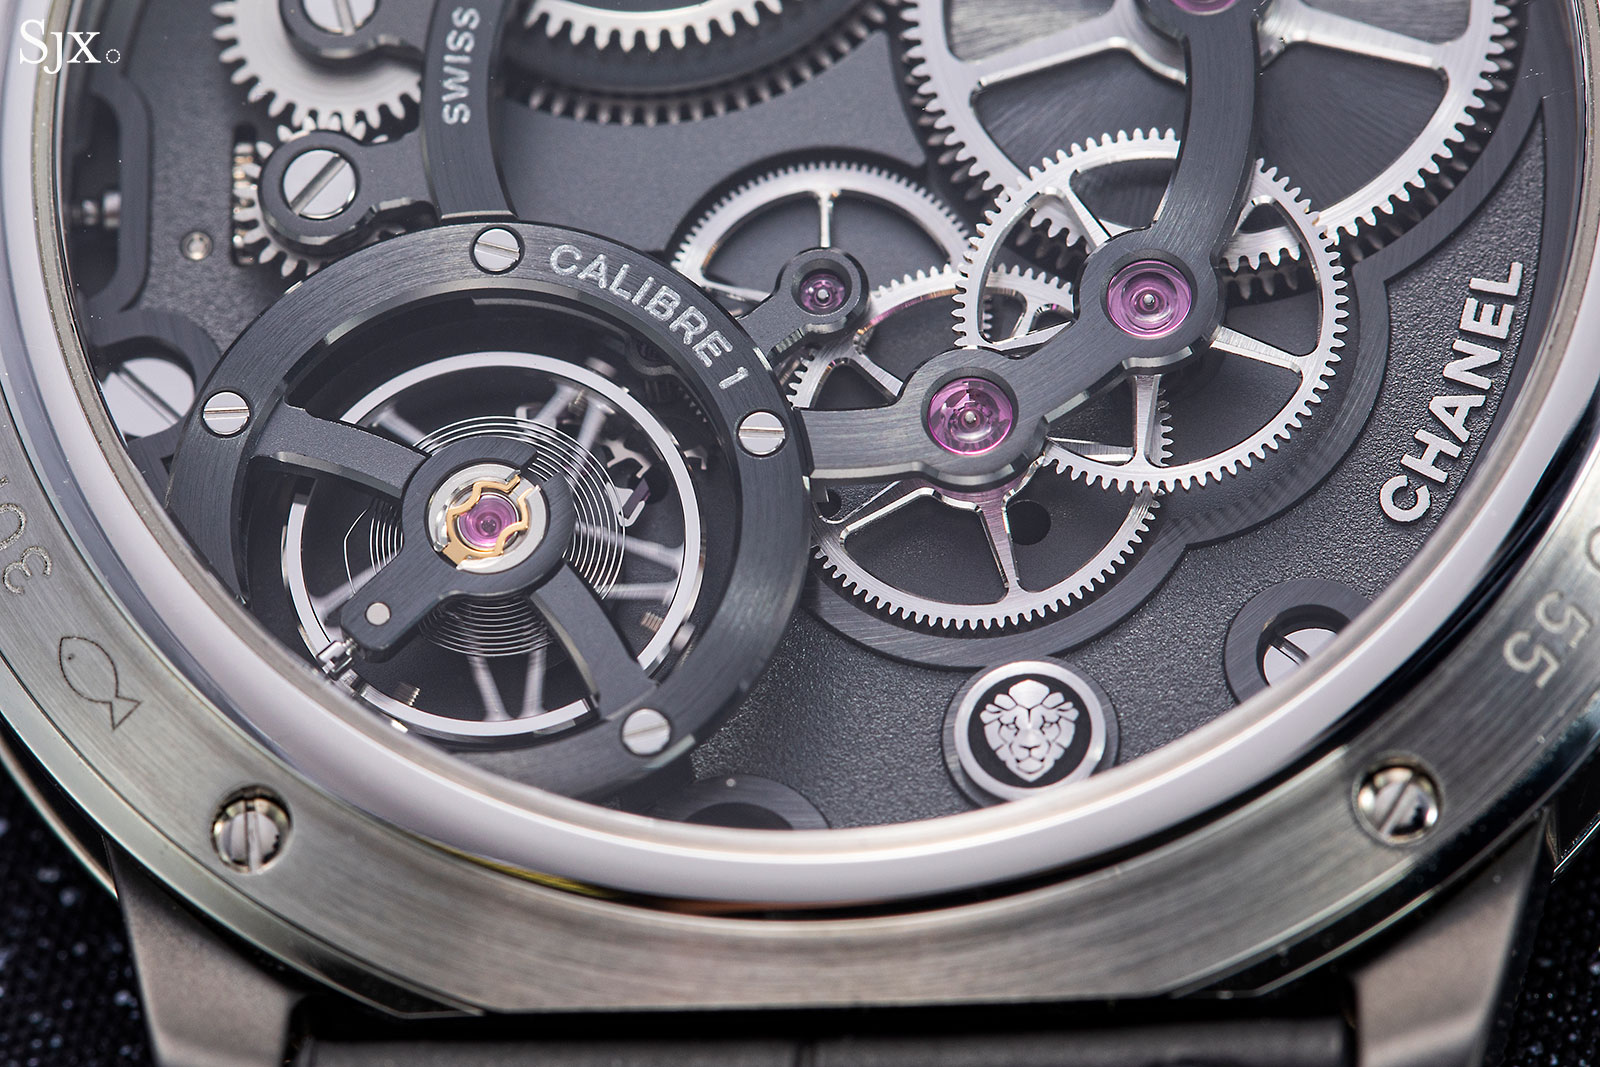 Introducing – The Handsome Chanel Monsieur Tourbillon Meteorite (Live Pics)  - WATCHLOUNGE